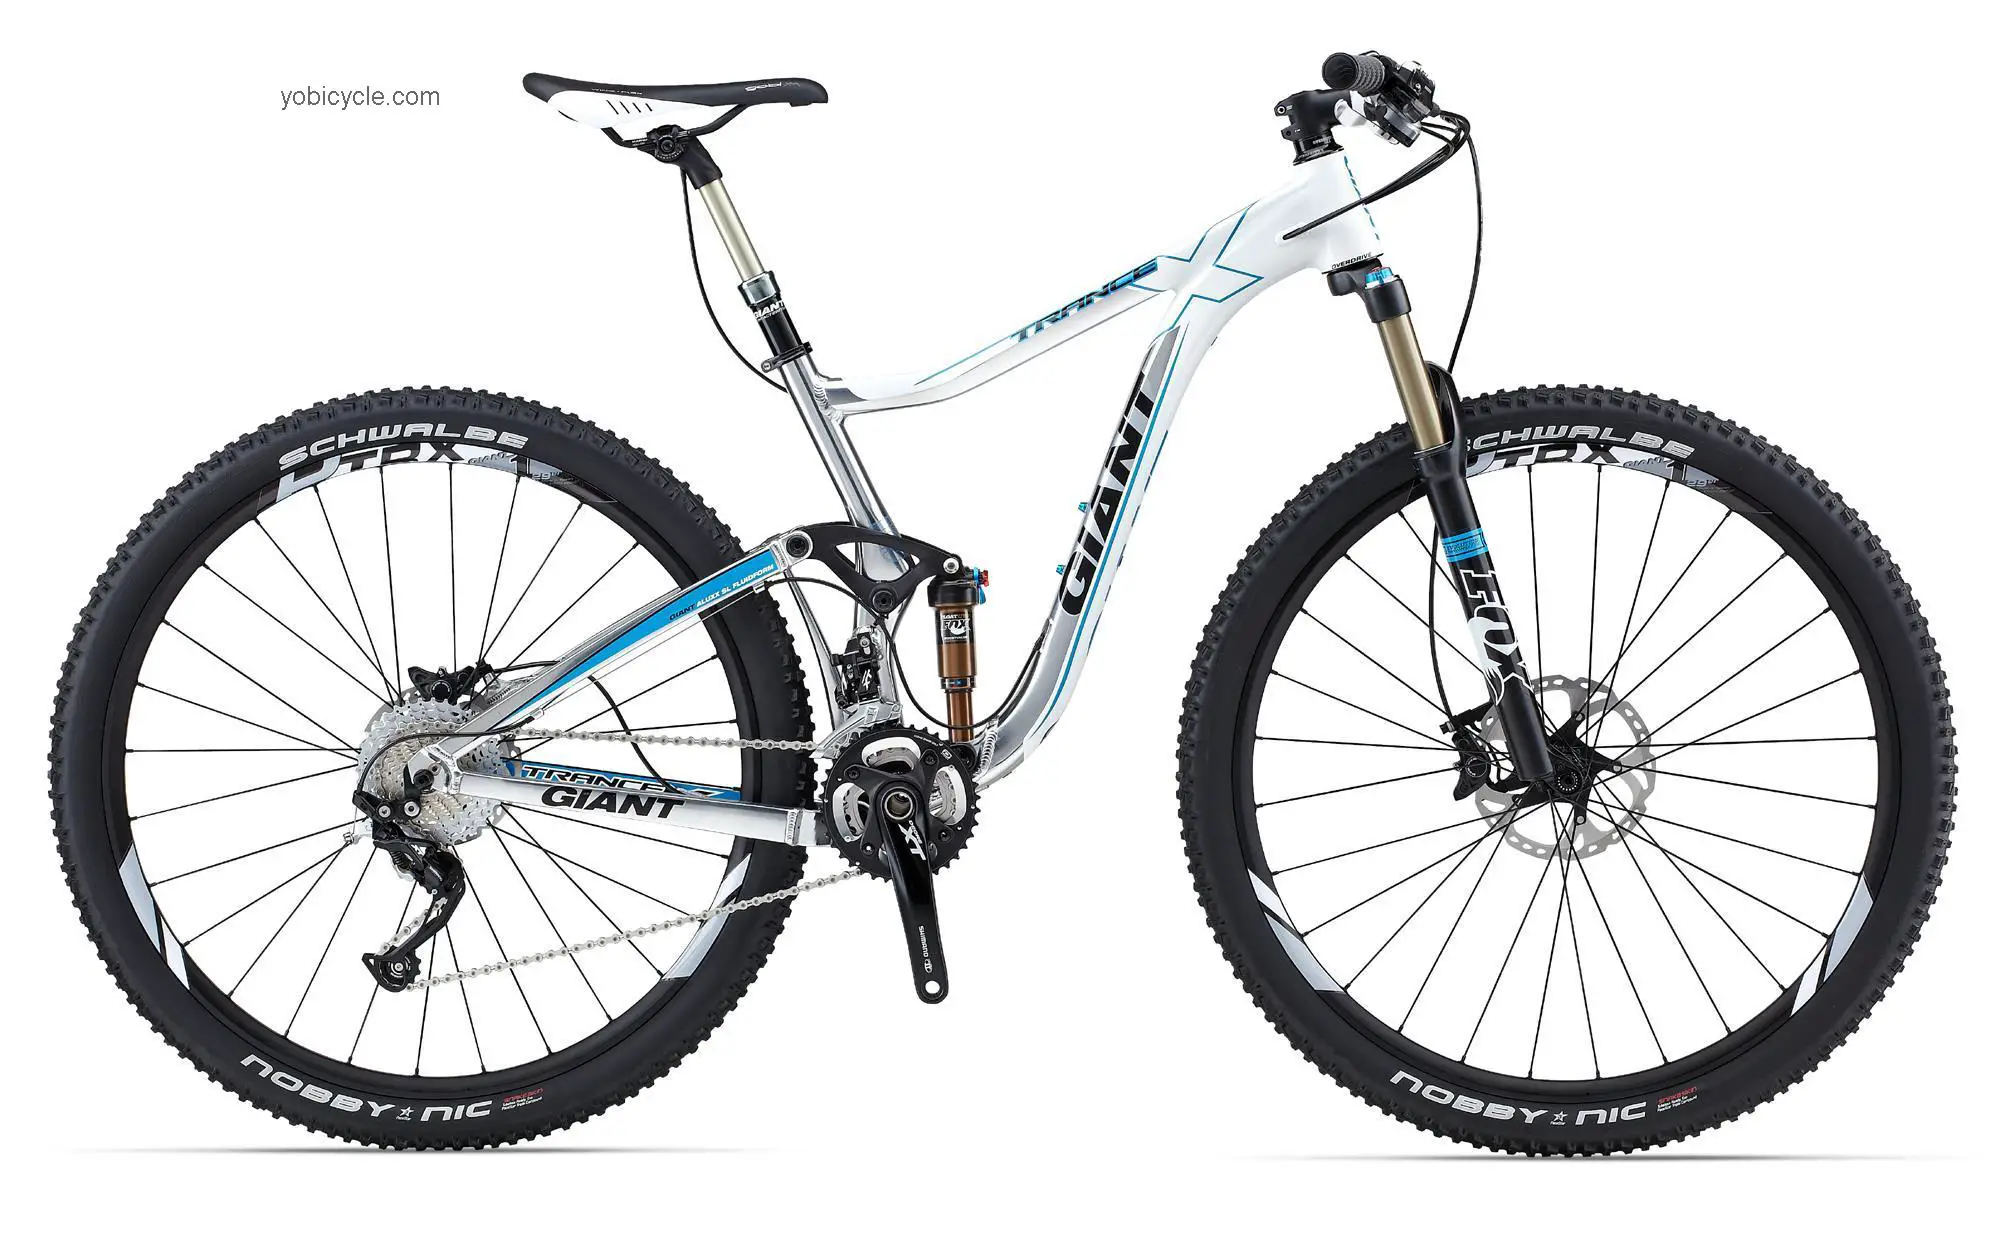 Giant Trance X 29er 0 2013 comparison online with competitors